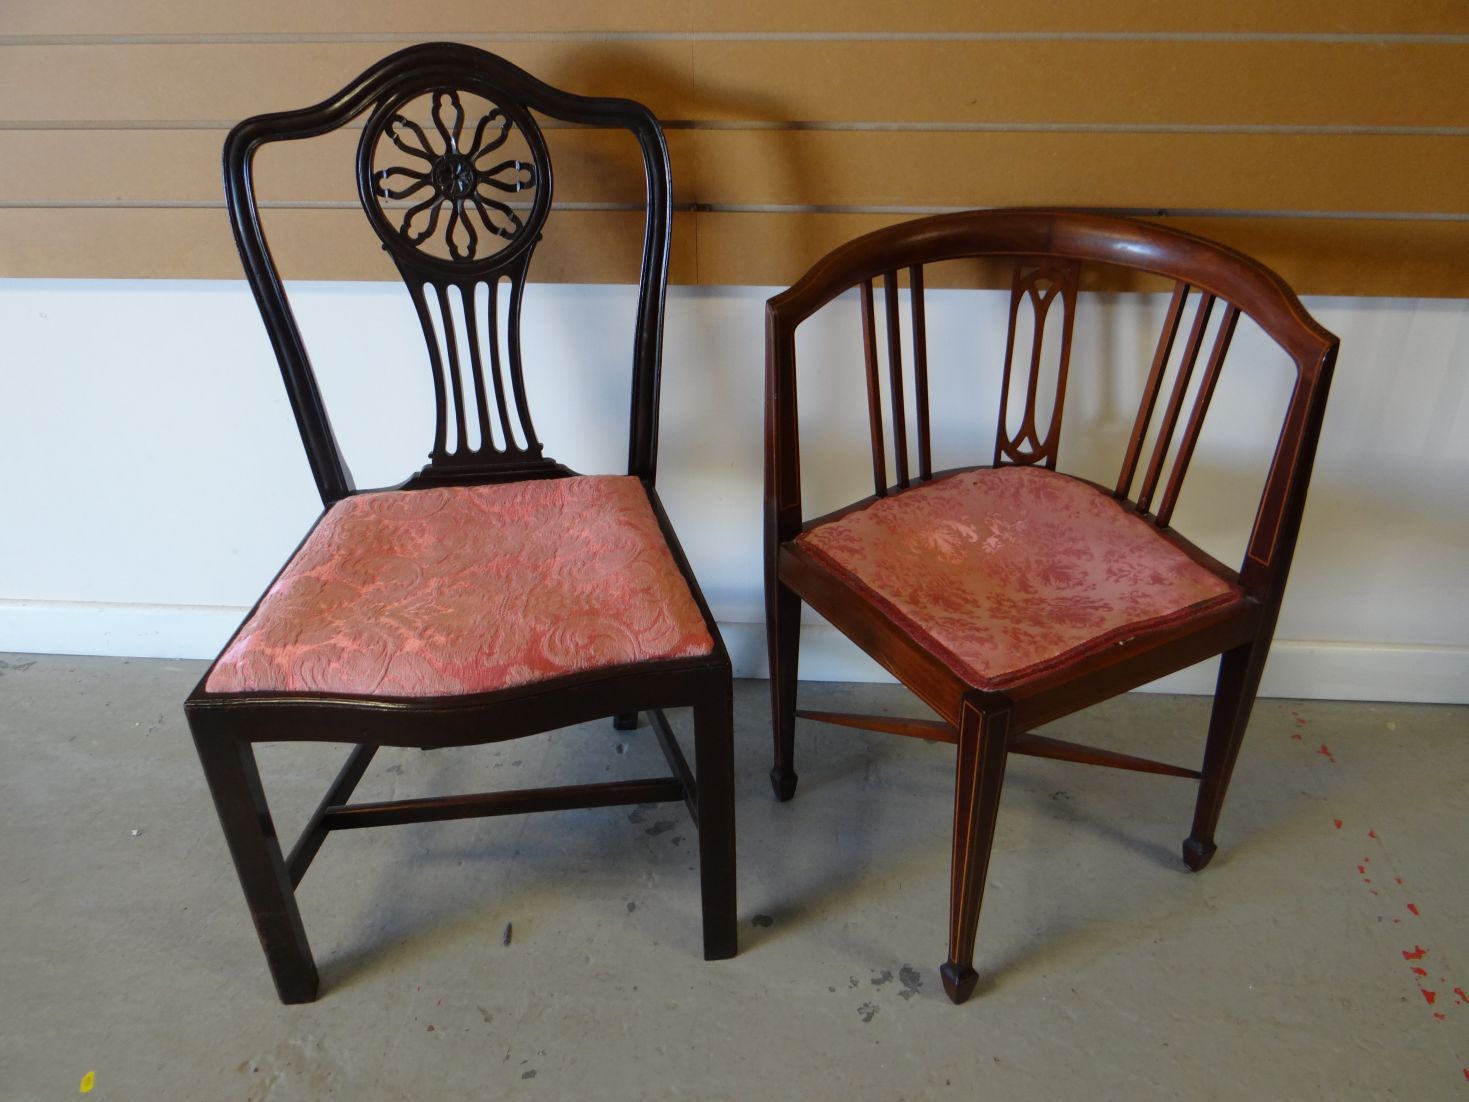 An inlaid mahogany corner-chair and another carve back chair